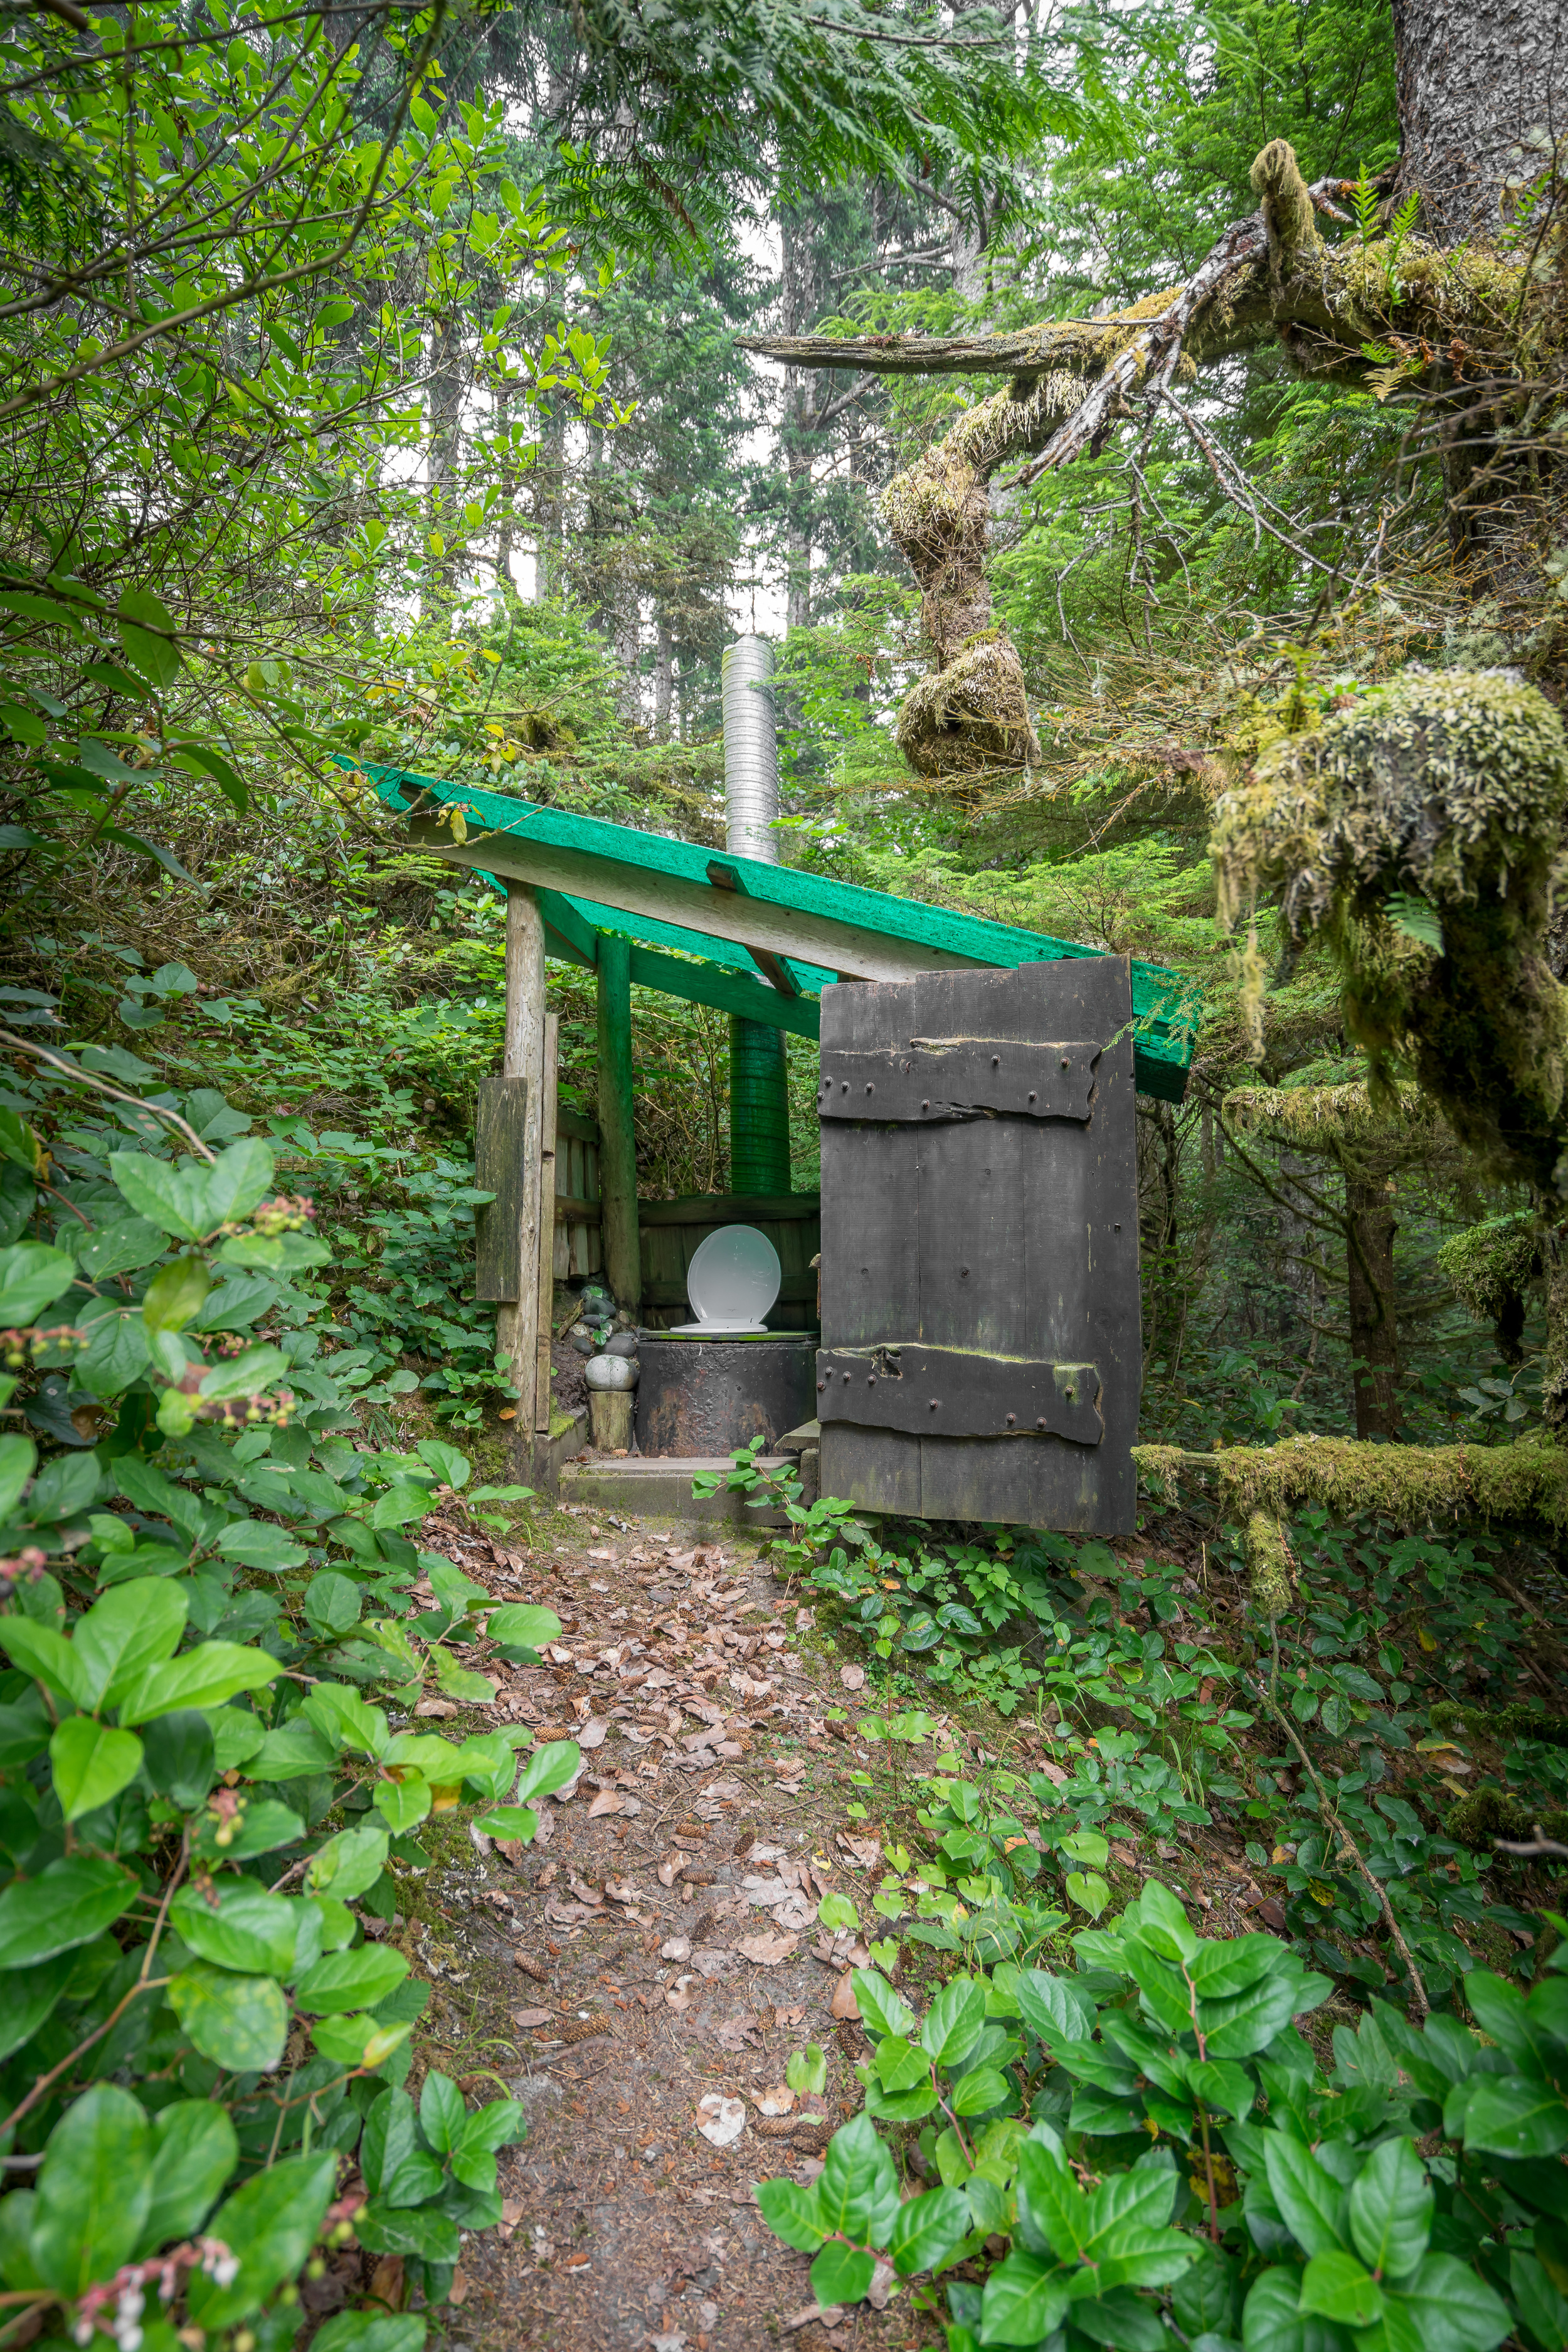  With no running water one must choose between a selection of pit toilets located throughout the property. 